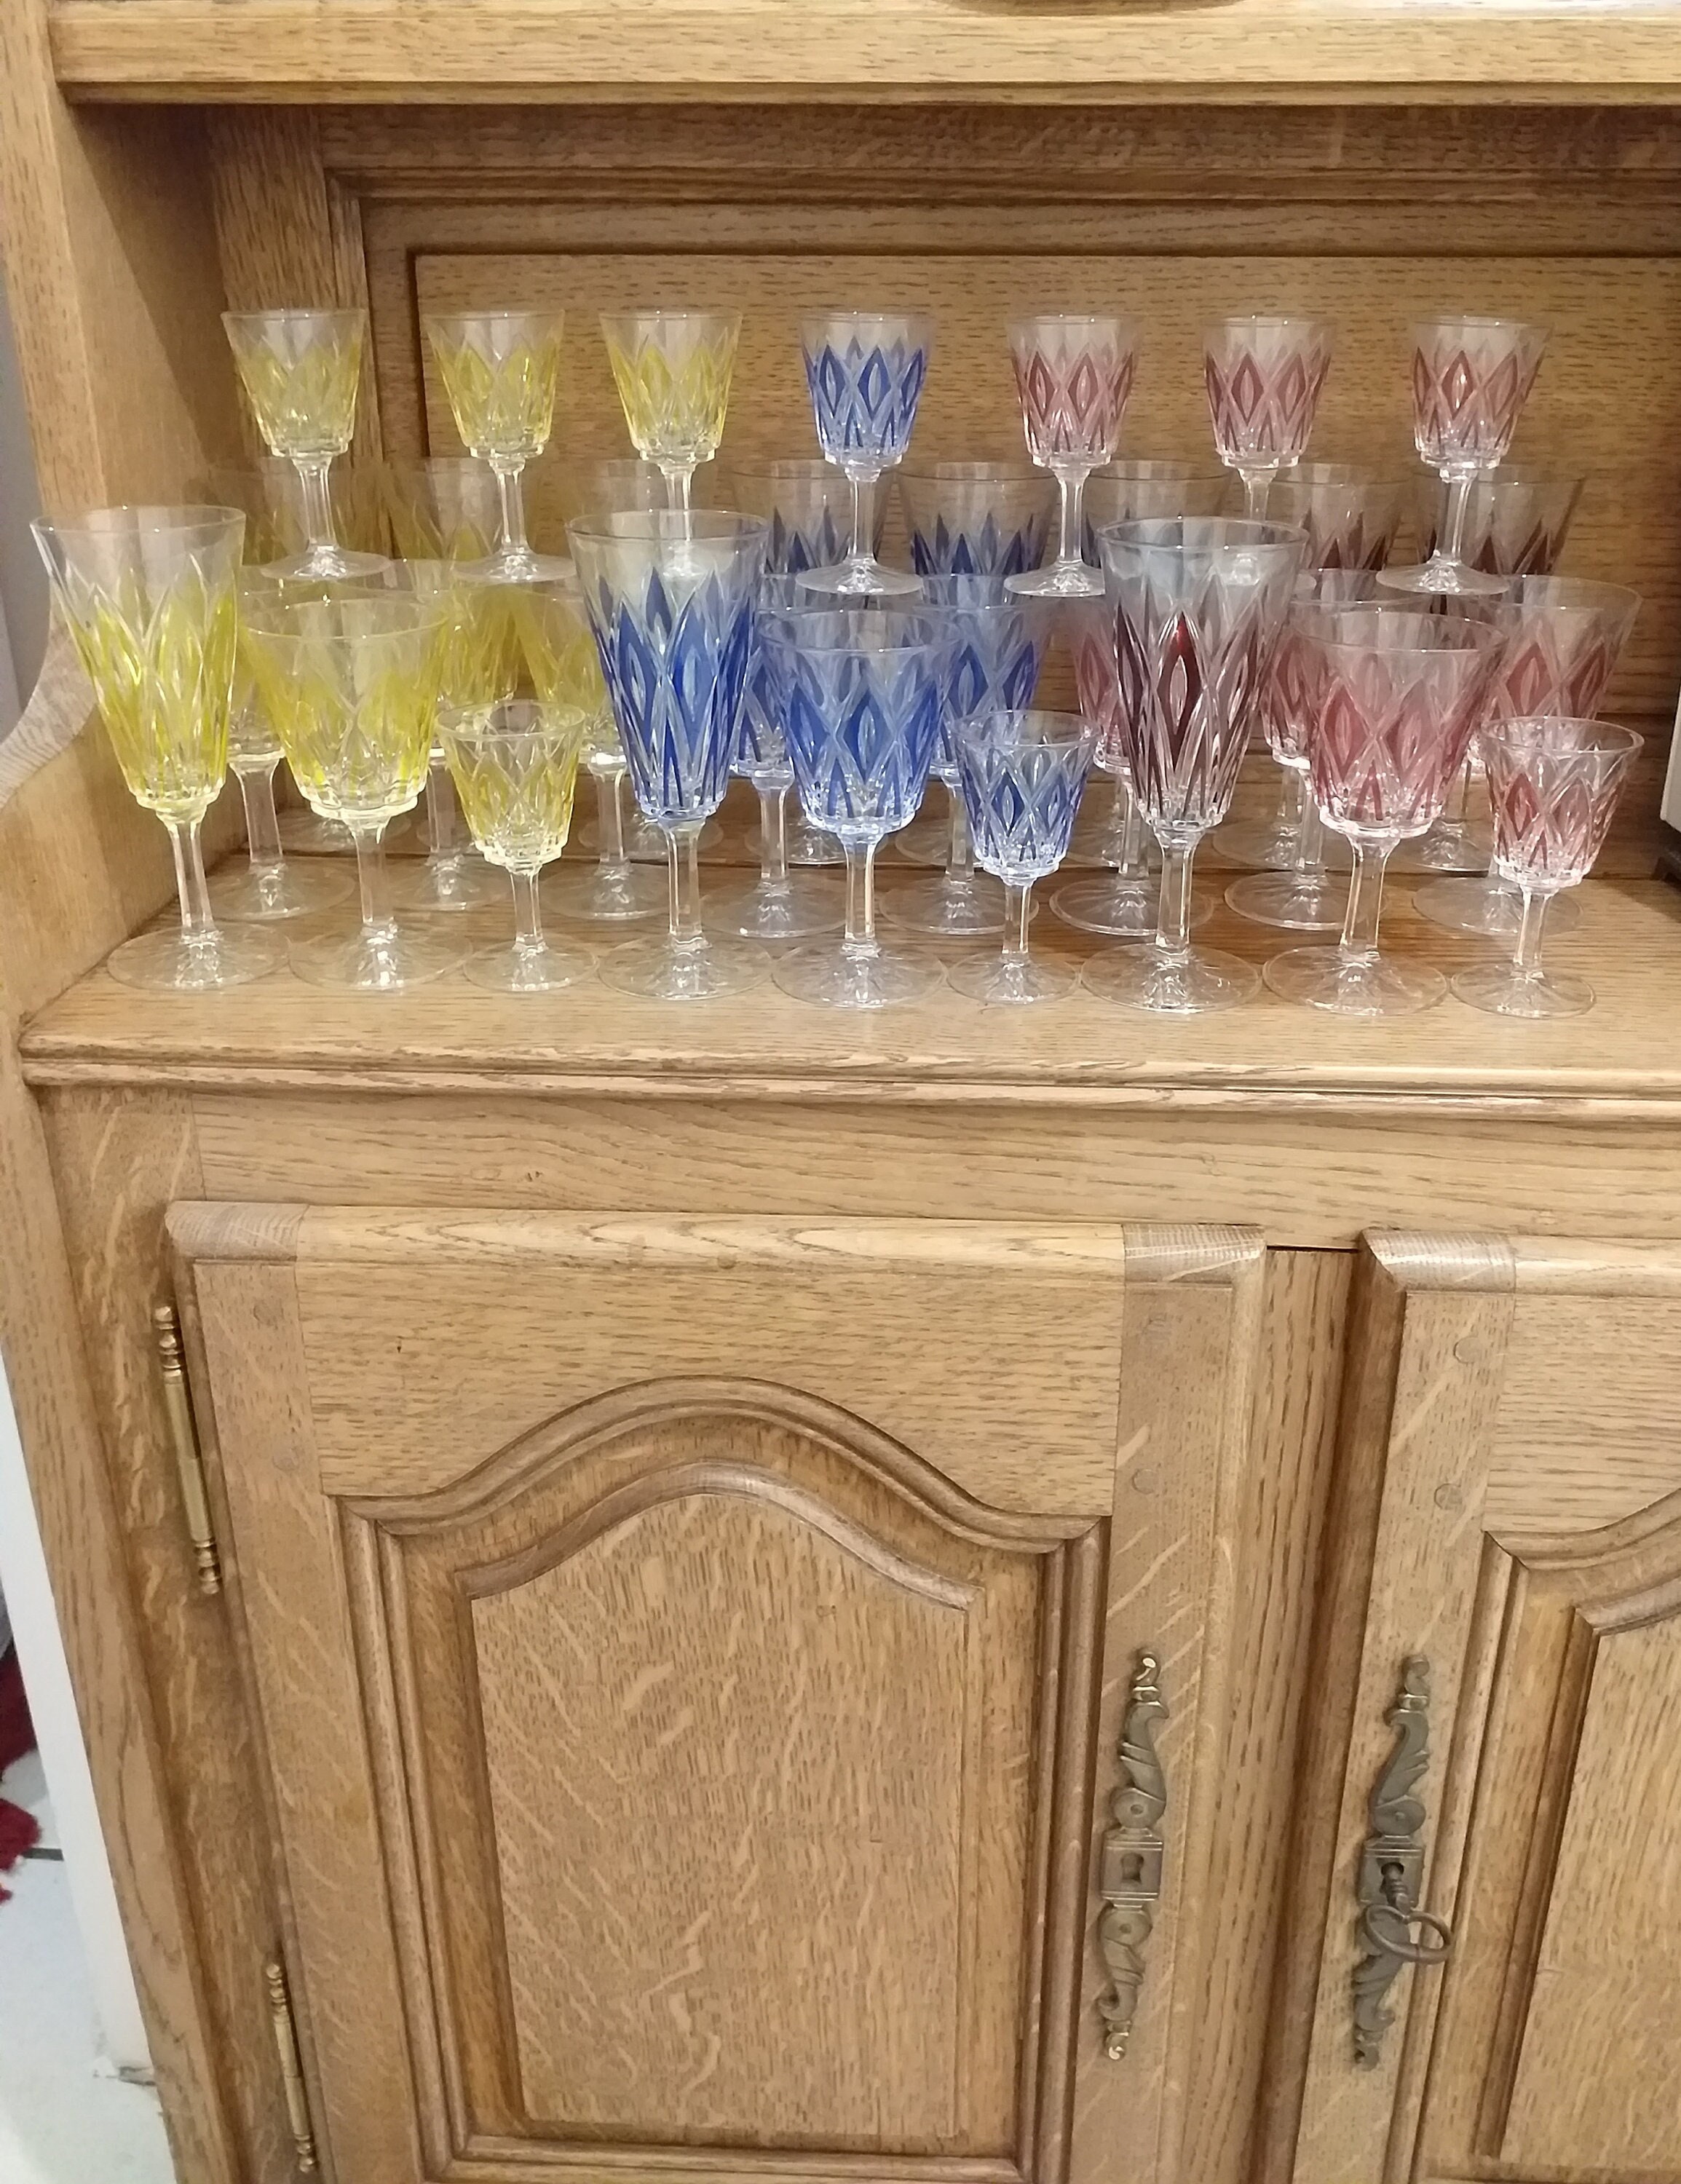 Vintage Colored Crystal Wine Glasses/Crystal Glasses For Spirits With A Pattern On Glass Set 11x11x1